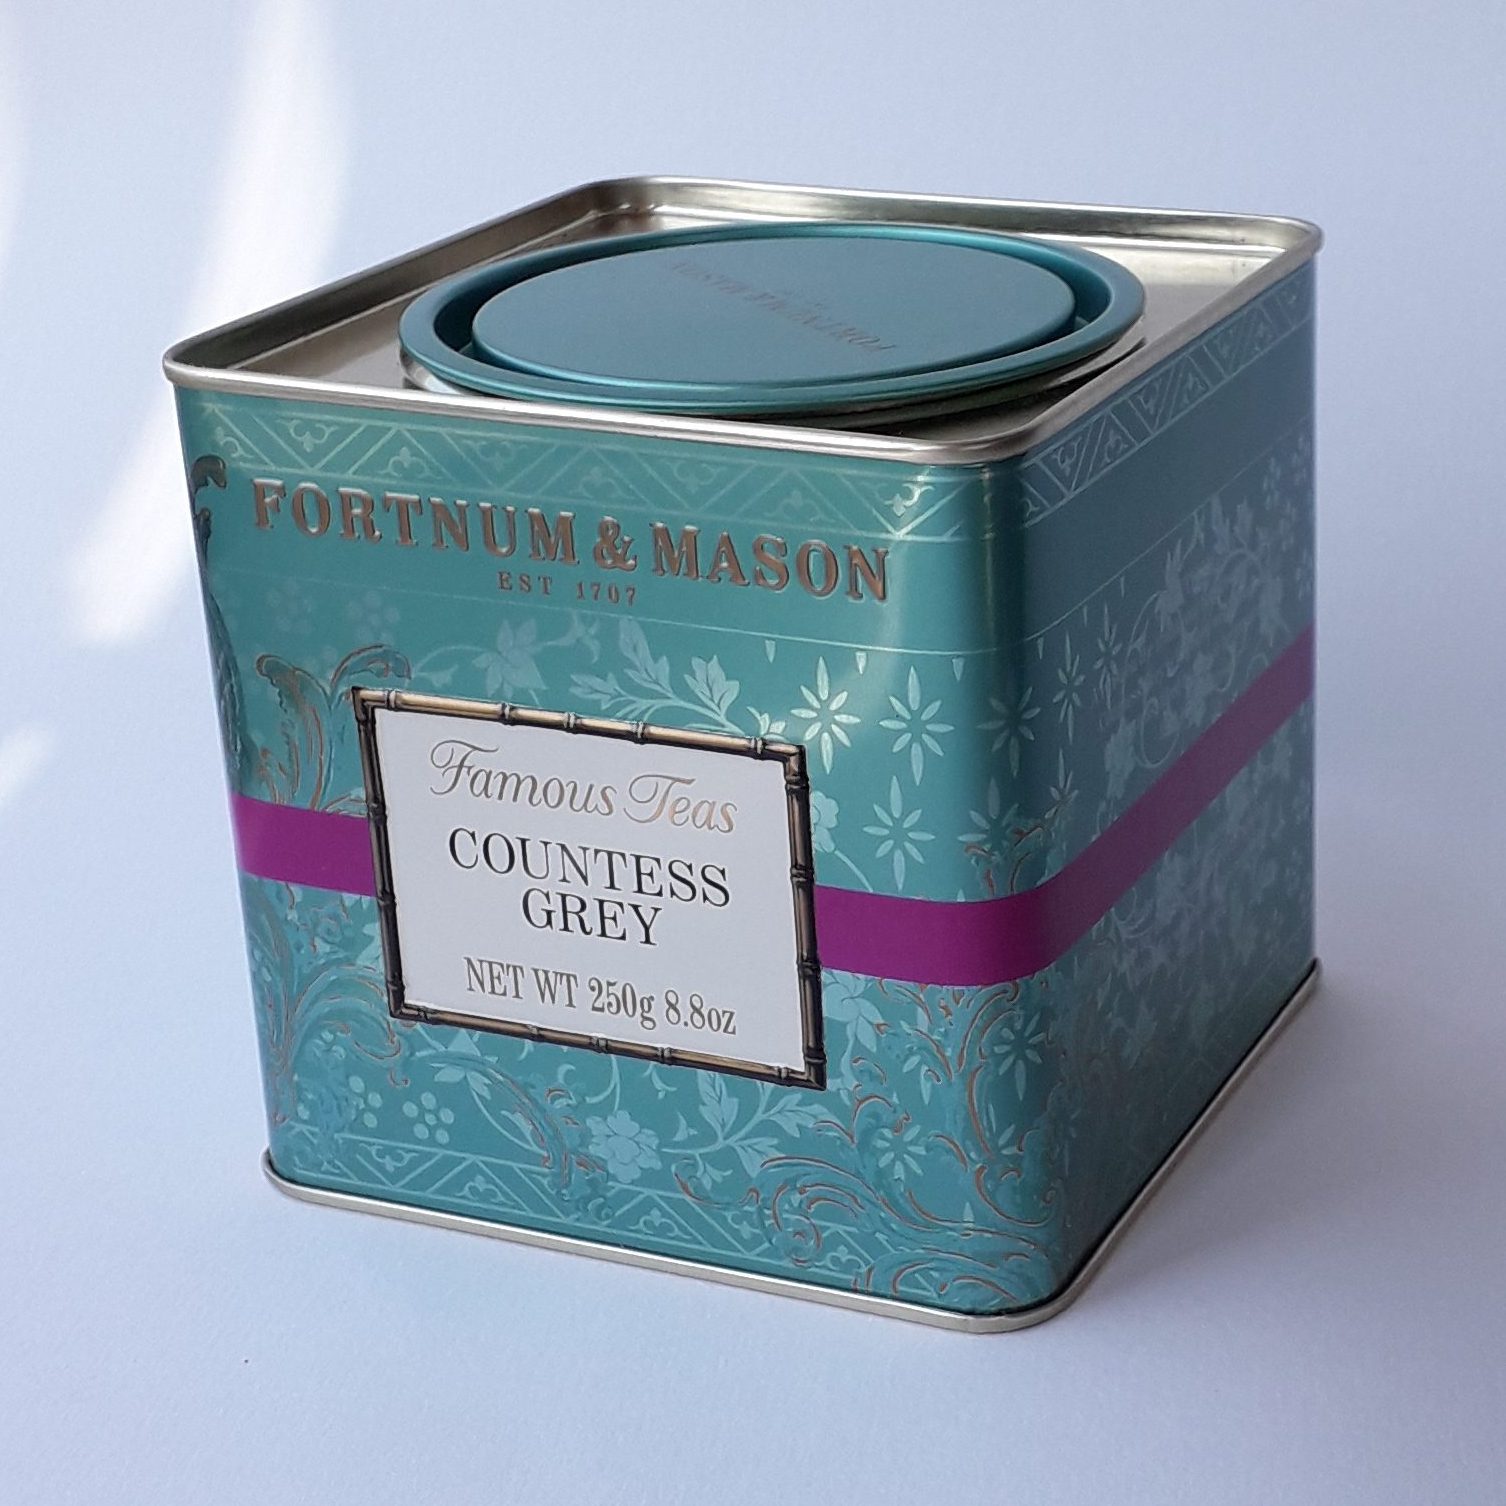 Fortnum and Mason Tea Caddy - photo for packaging review blog at scgreenwood.co.uk